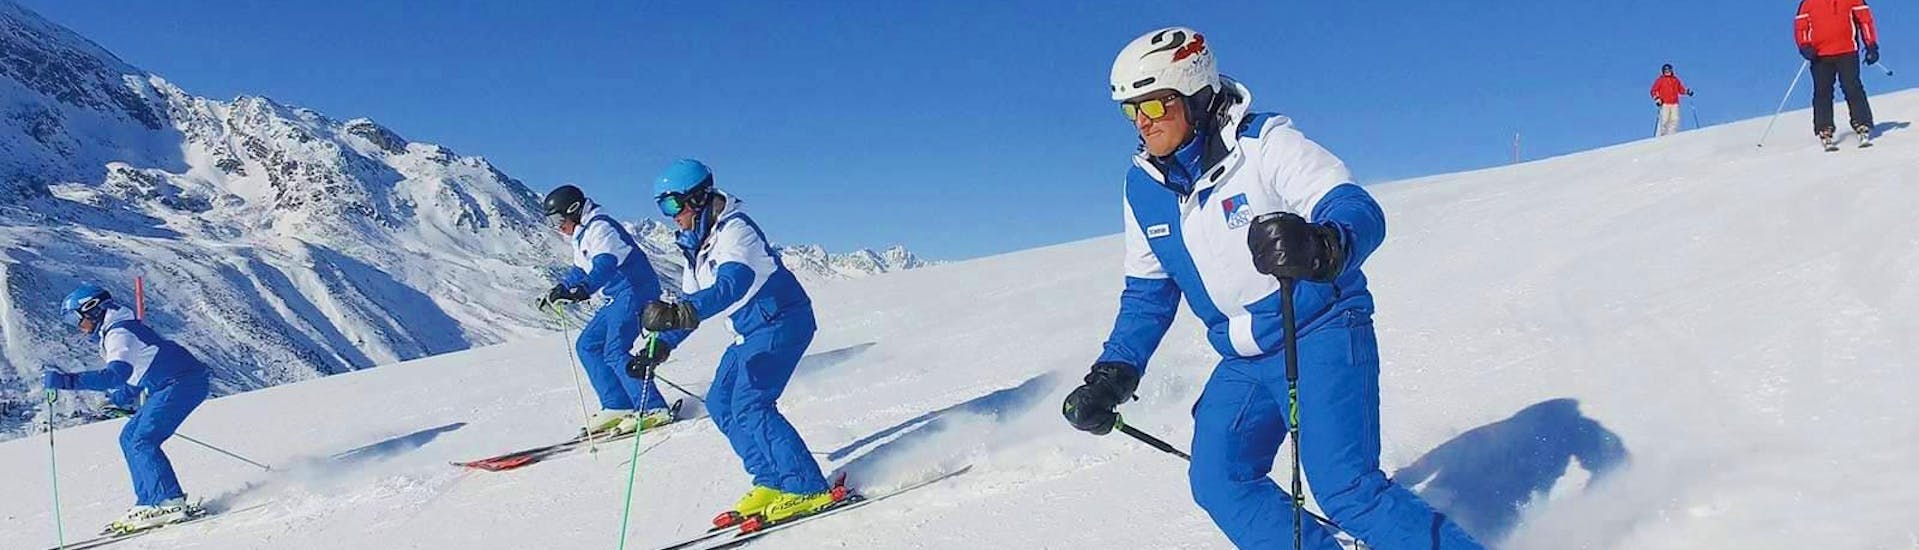 During the Adult Ski Lessons for Skiers with Experience with Schischule Hochgurgl, the certified ski instructors are demonstrating the right skiing technique.